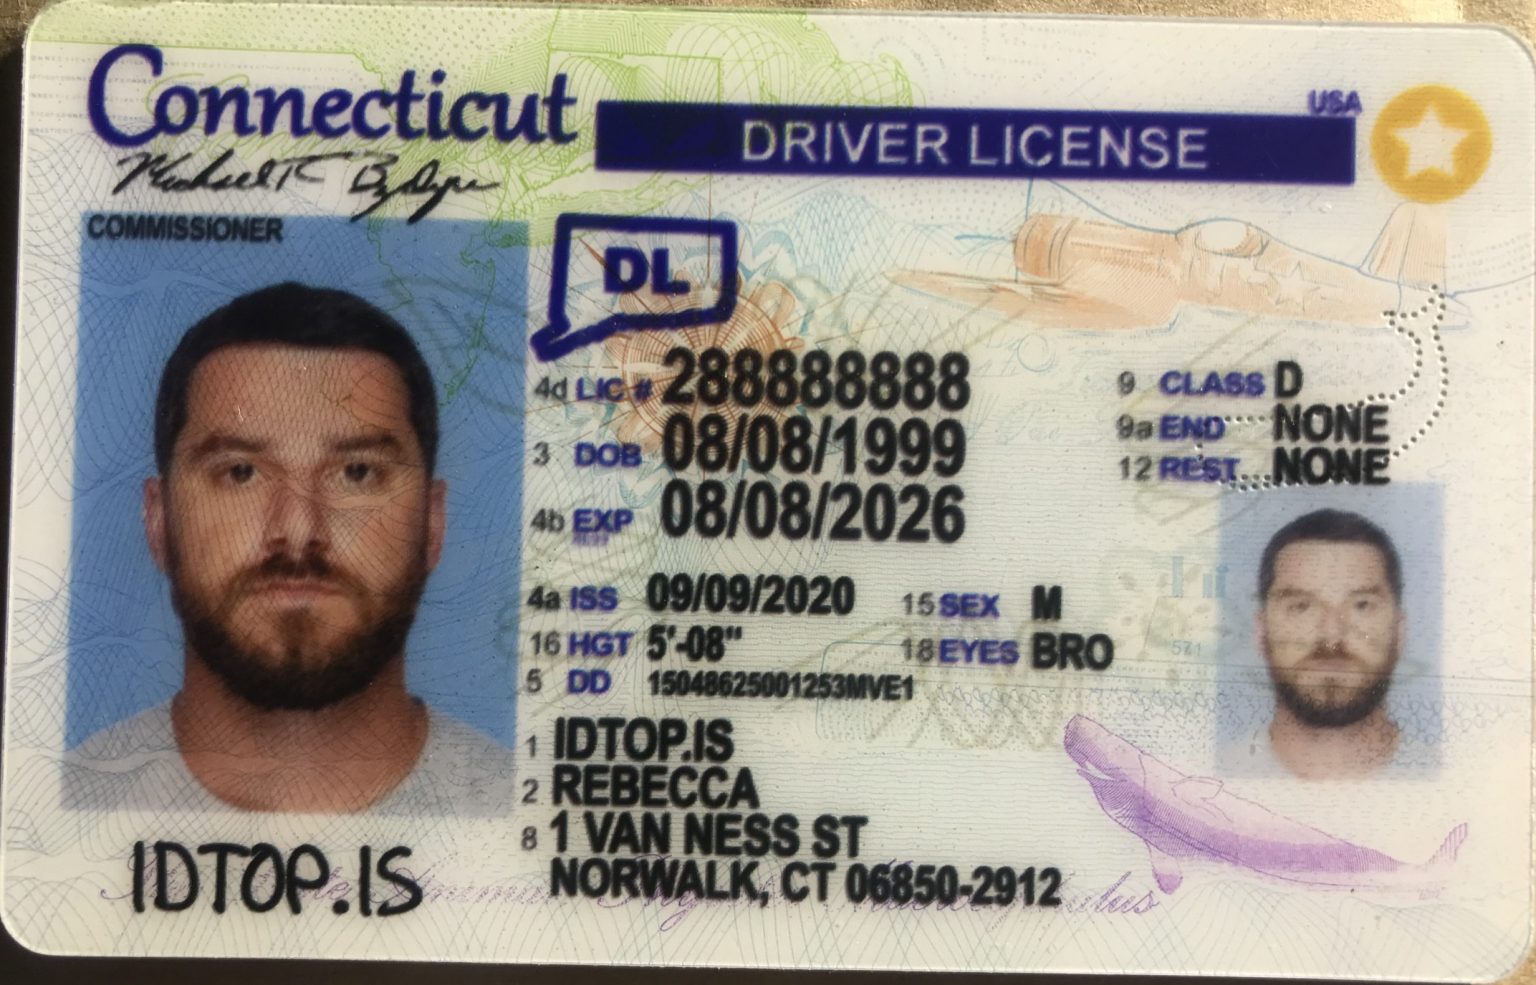 Connecticut Fake Id Buy Scannable Fake Ids Idtop